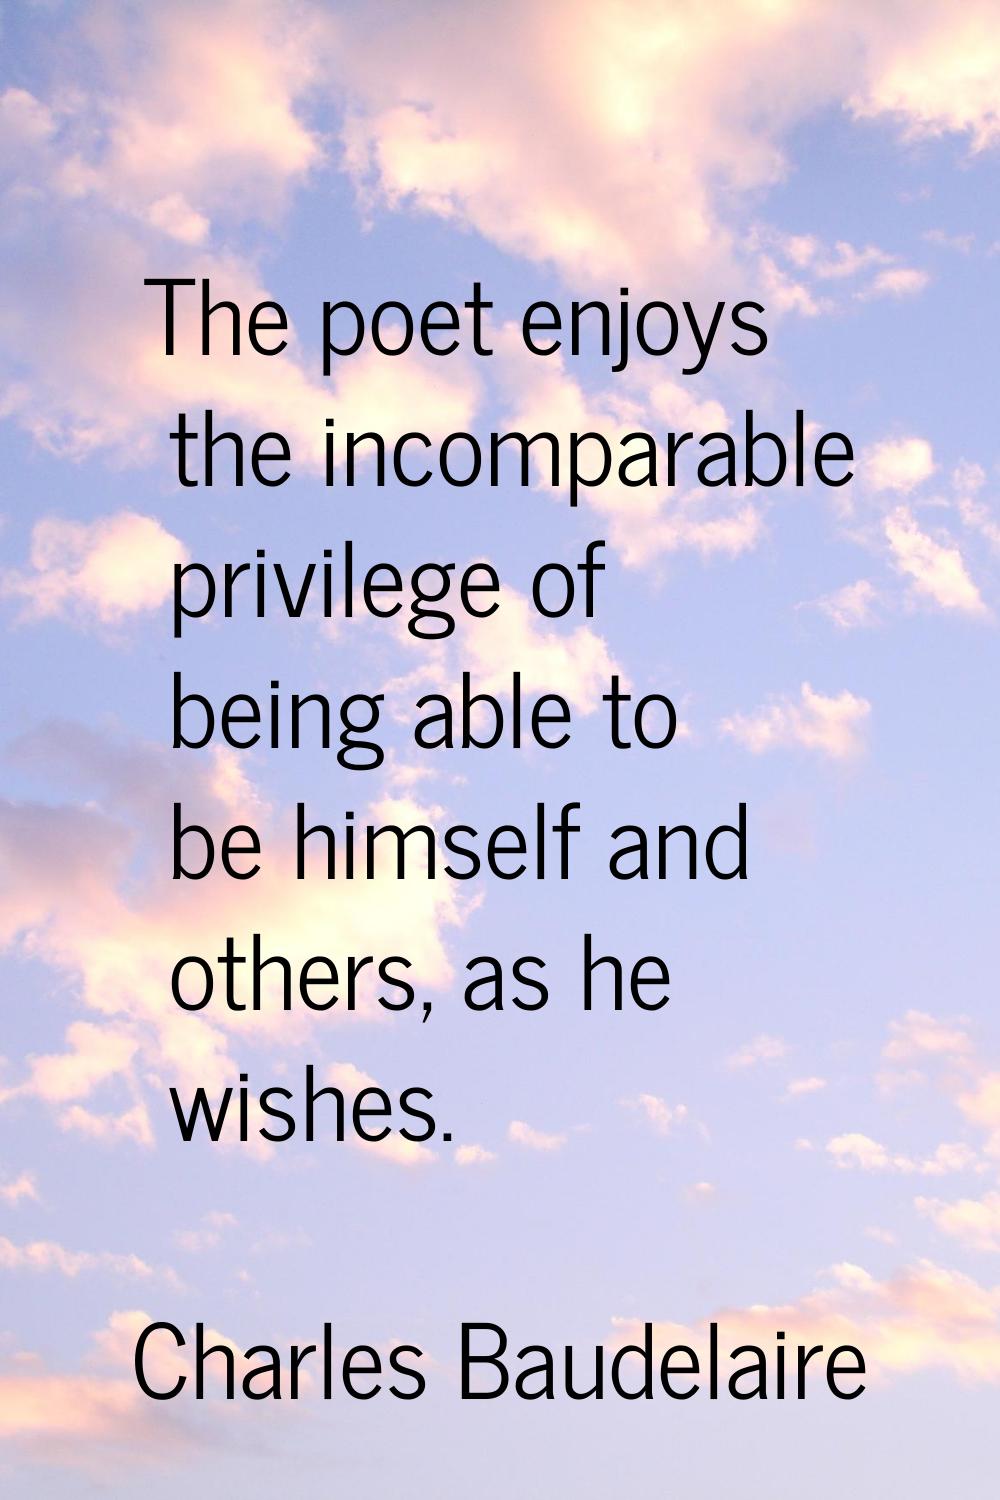 The poet enjoys the incomparable privilege of being able to be himself and others, as he wishes.